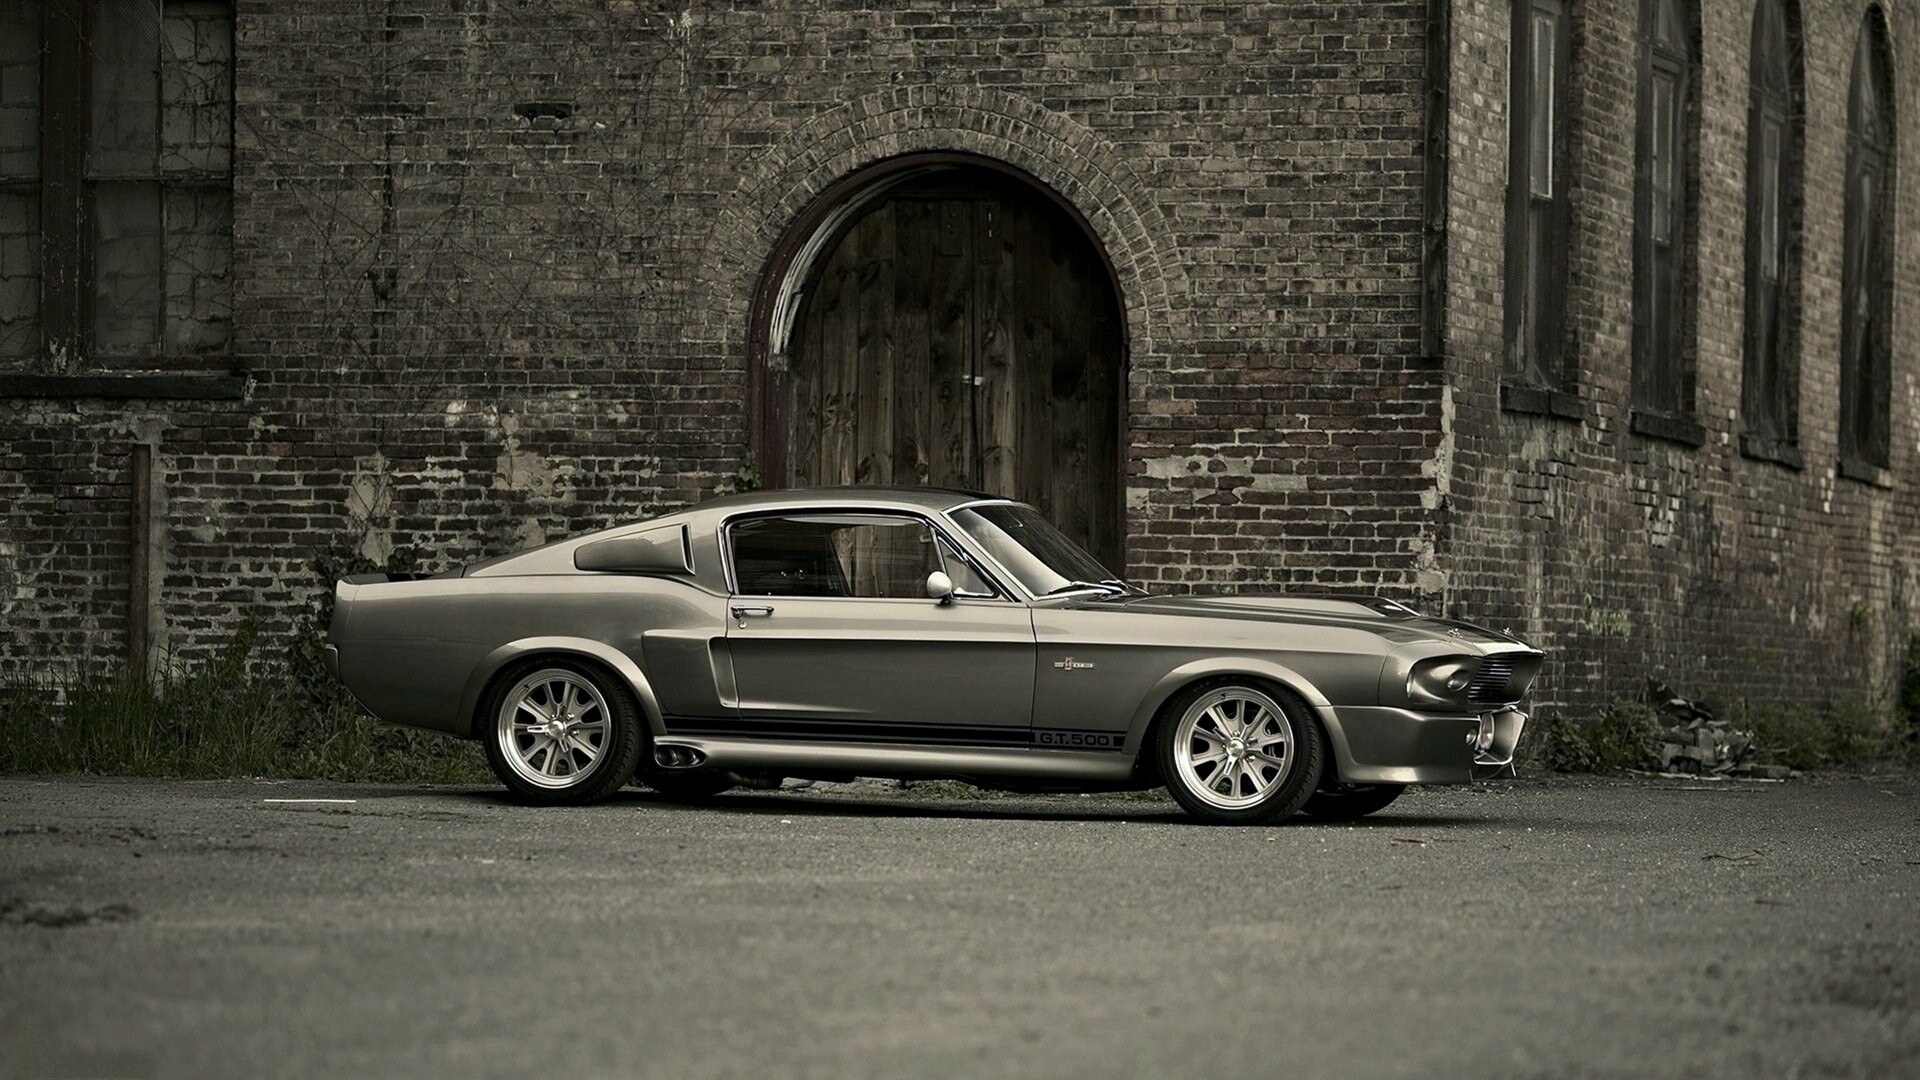 Ford: The Mustang, One of the first vehicles that came to be known as a “pony car”. 1920x1080 Full HD Wallpaper.